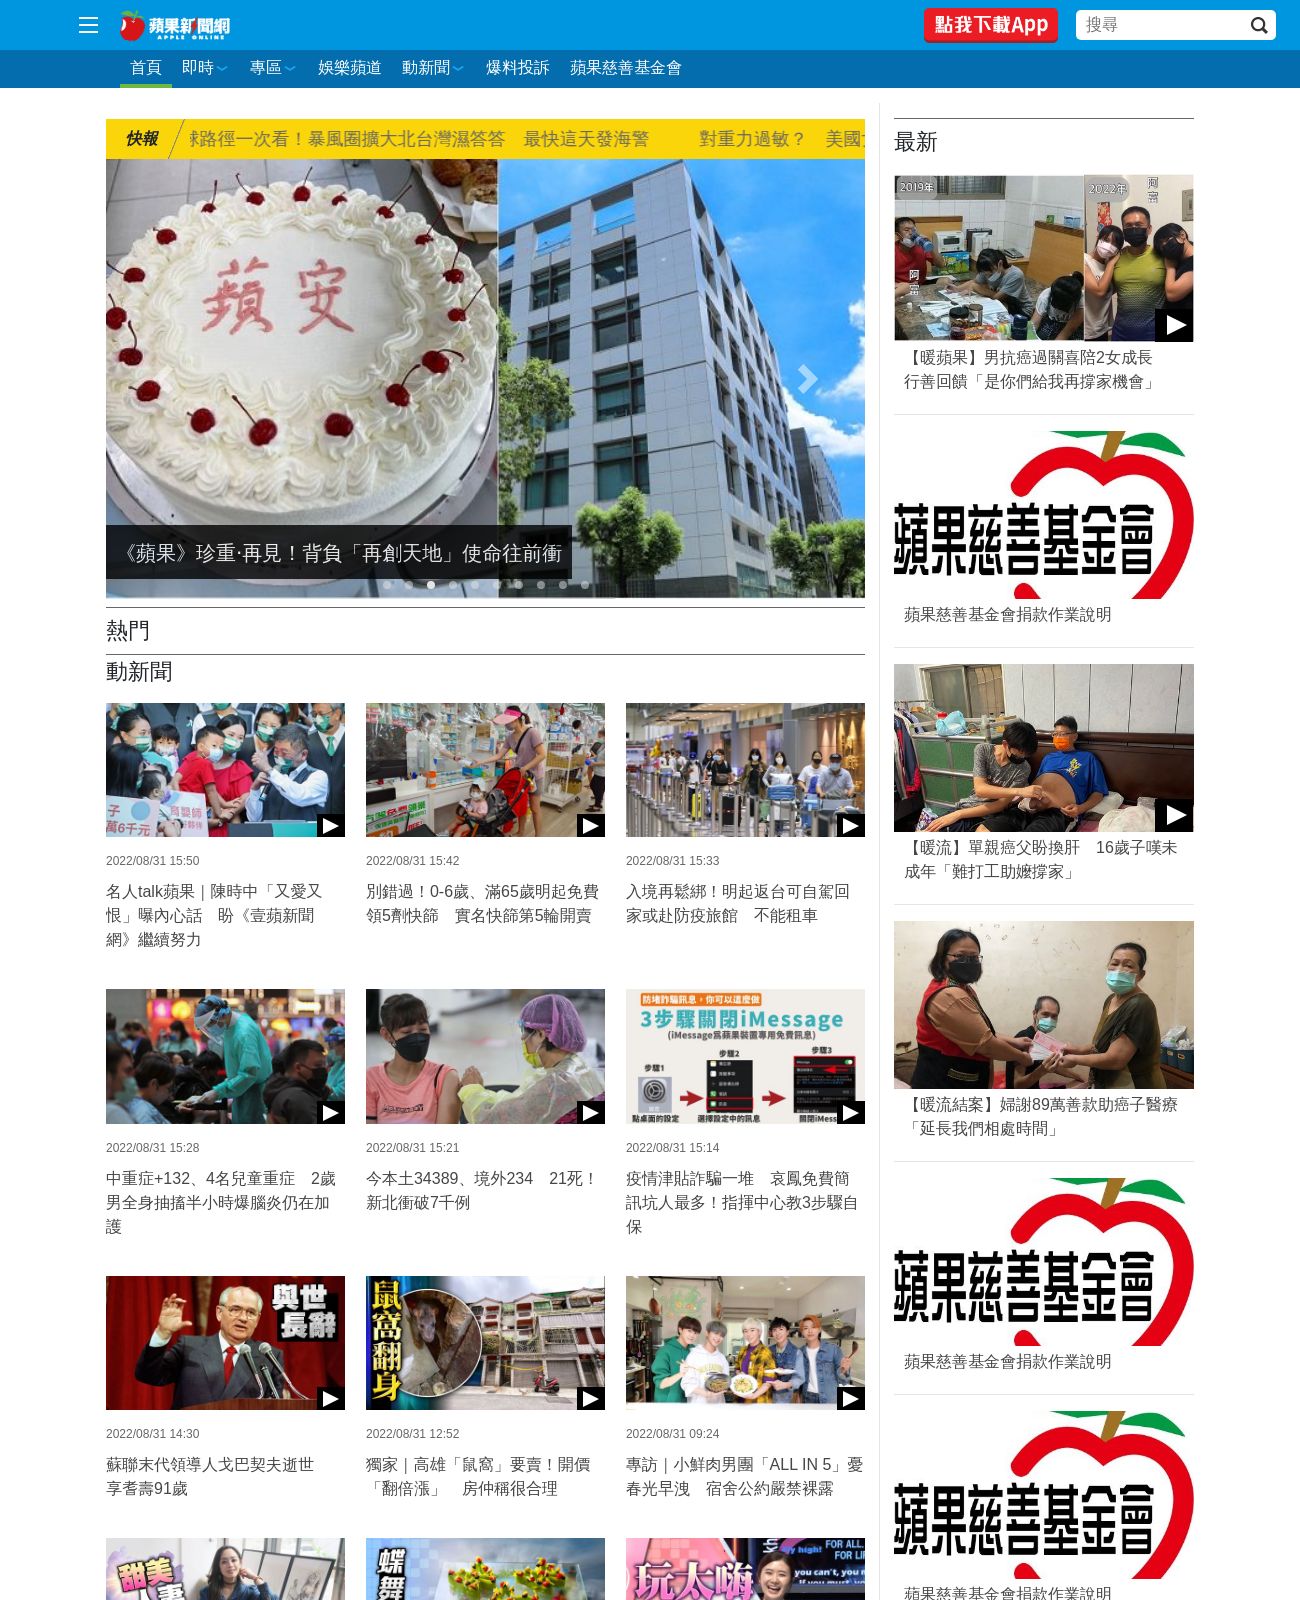 Apple Daily at 2022-09-19 22:09:06+08:00 local time